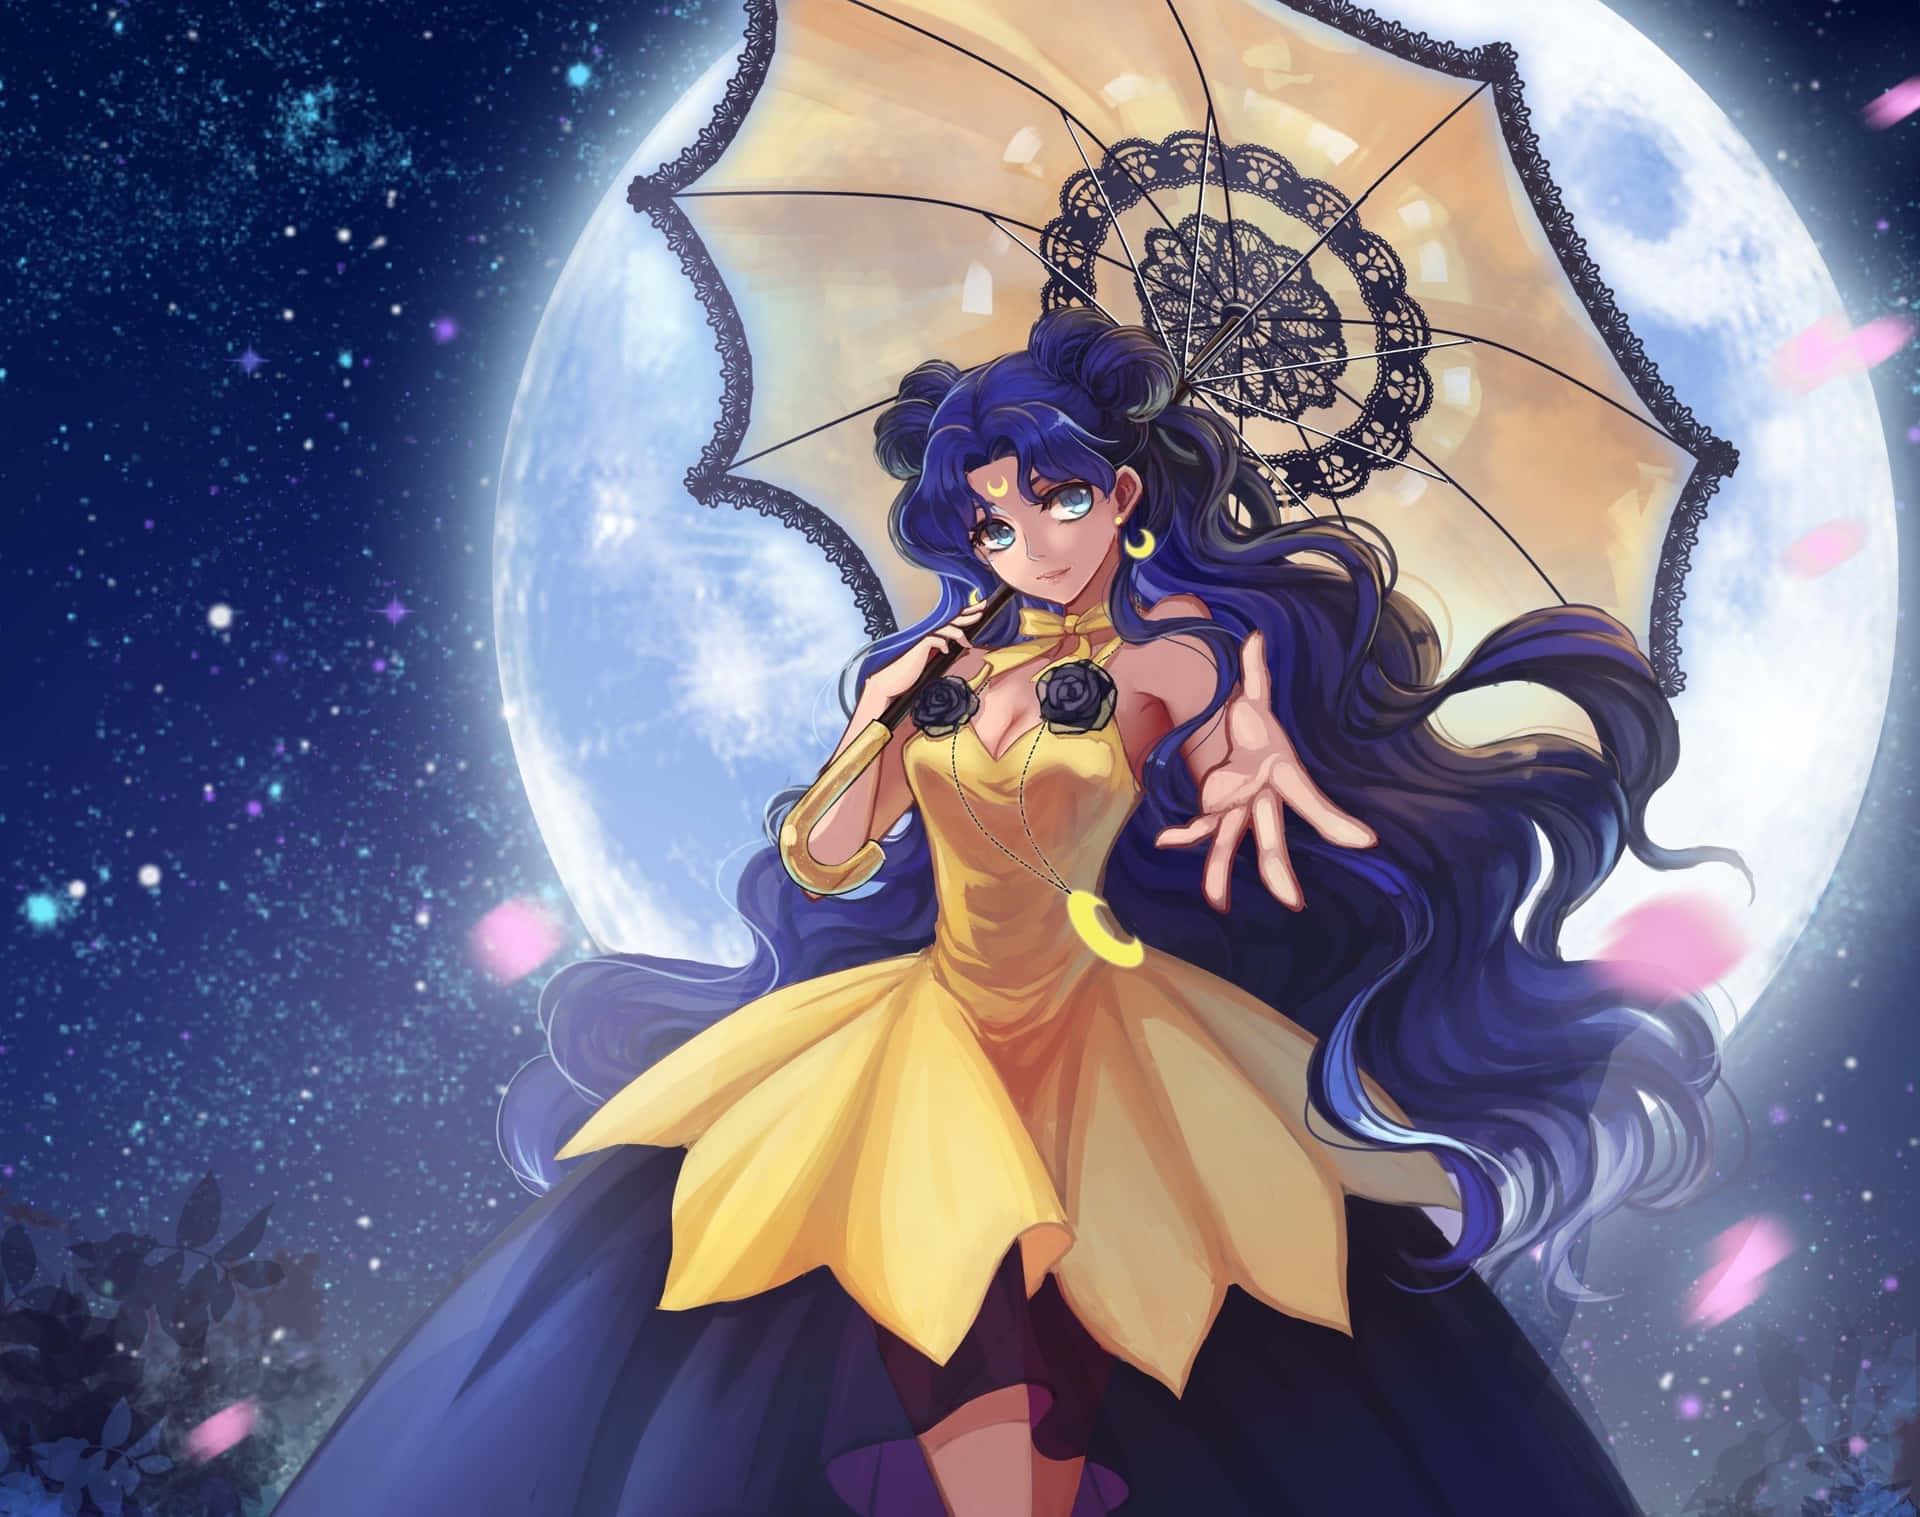 Sailormoon Crystal Luna Would Be Translated To Italian As 